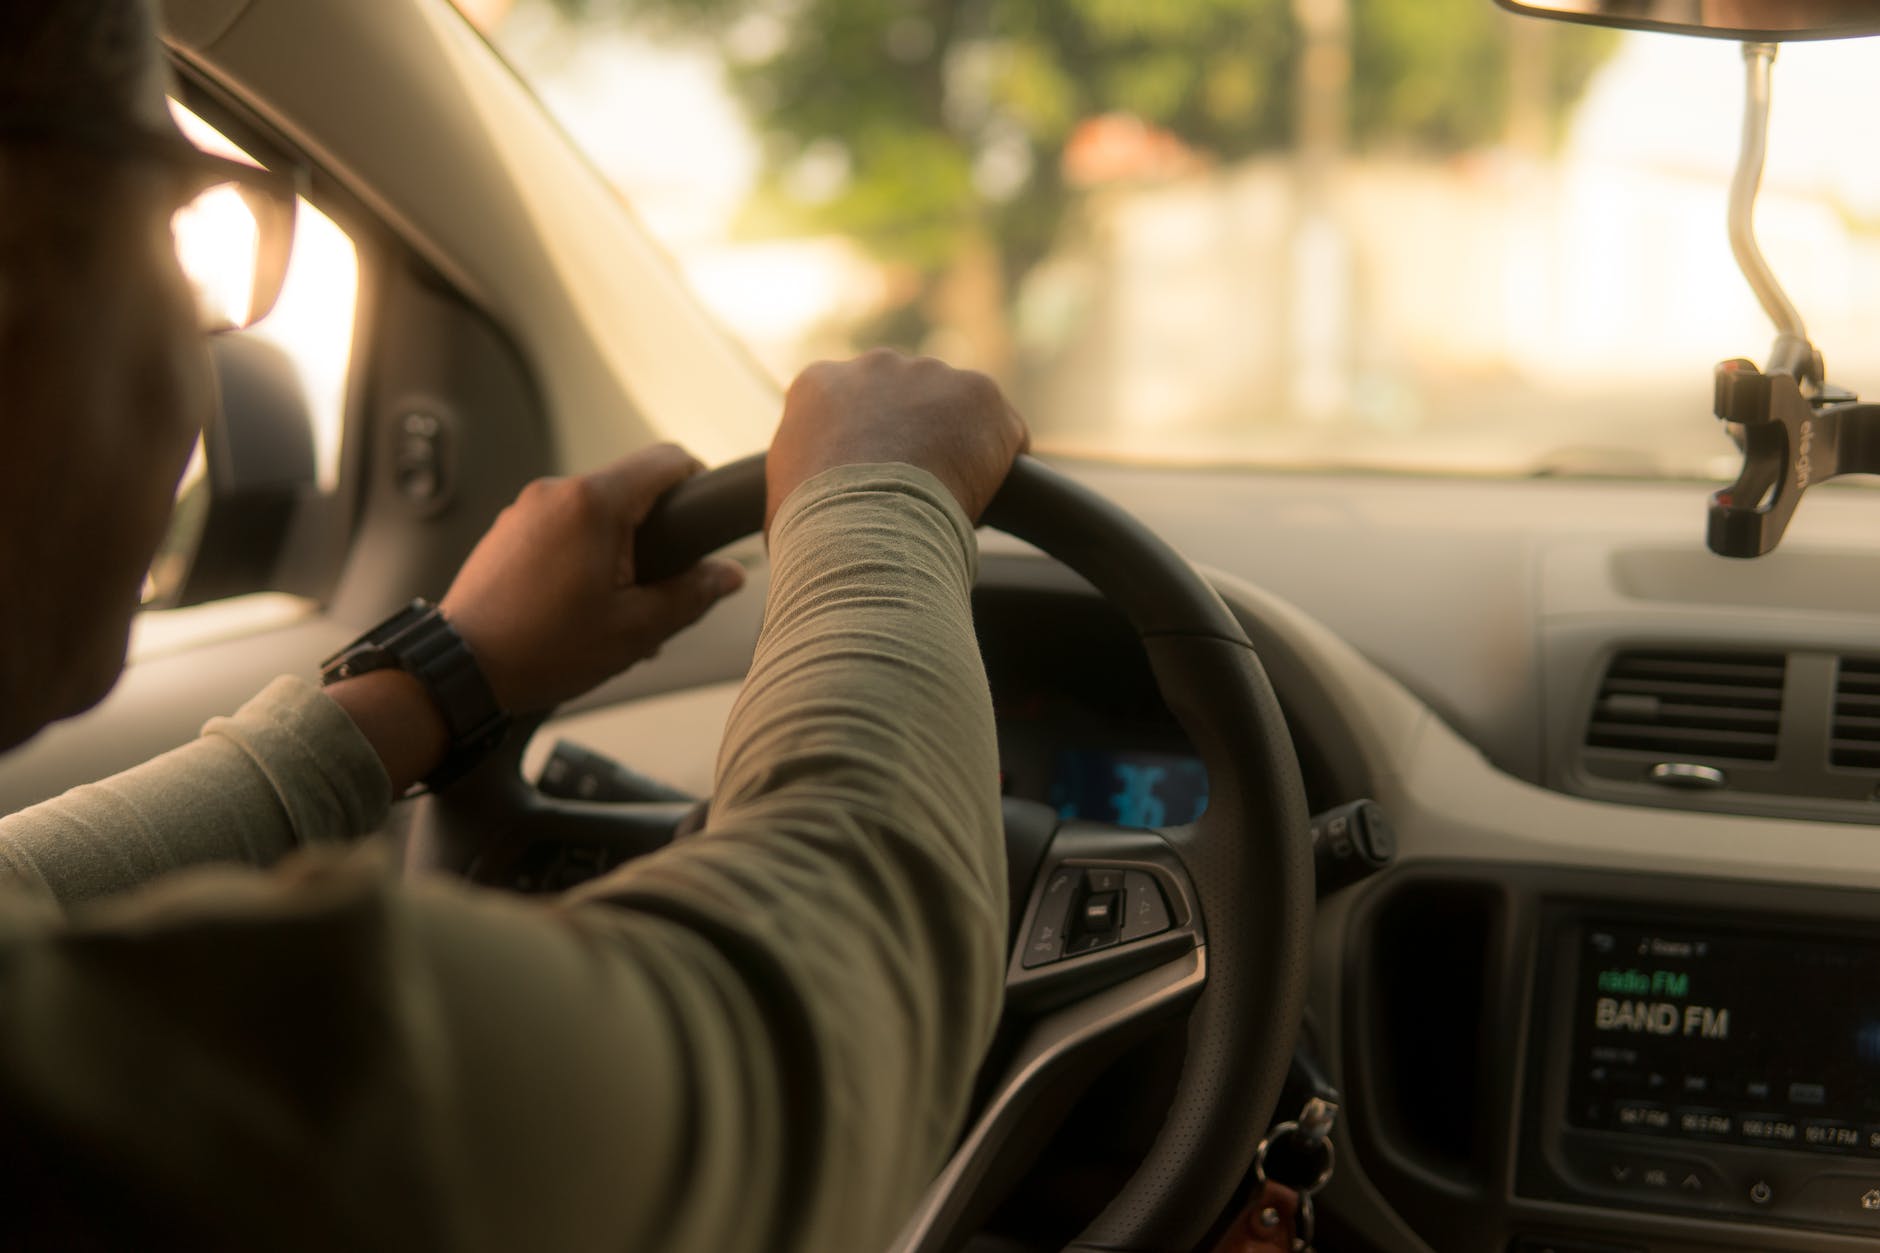 Clement got back in his car and drove off. | Source: Pexels